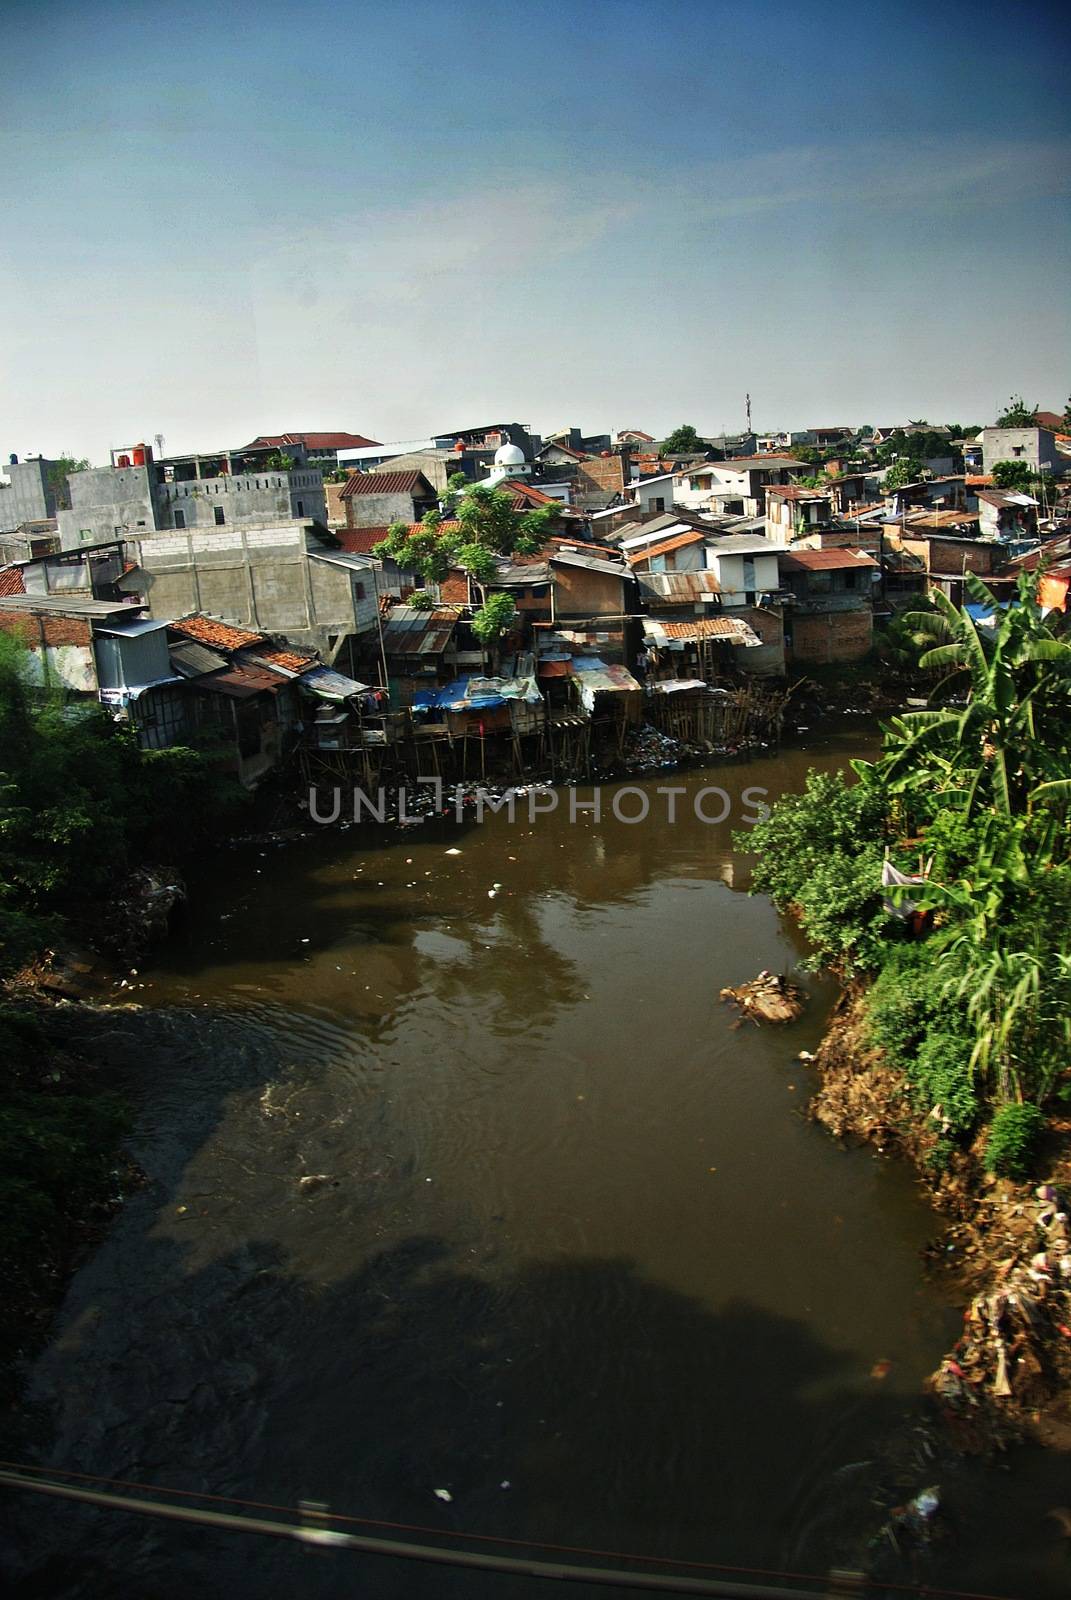 Jakarta slums area seen from a moving train by craigansibin